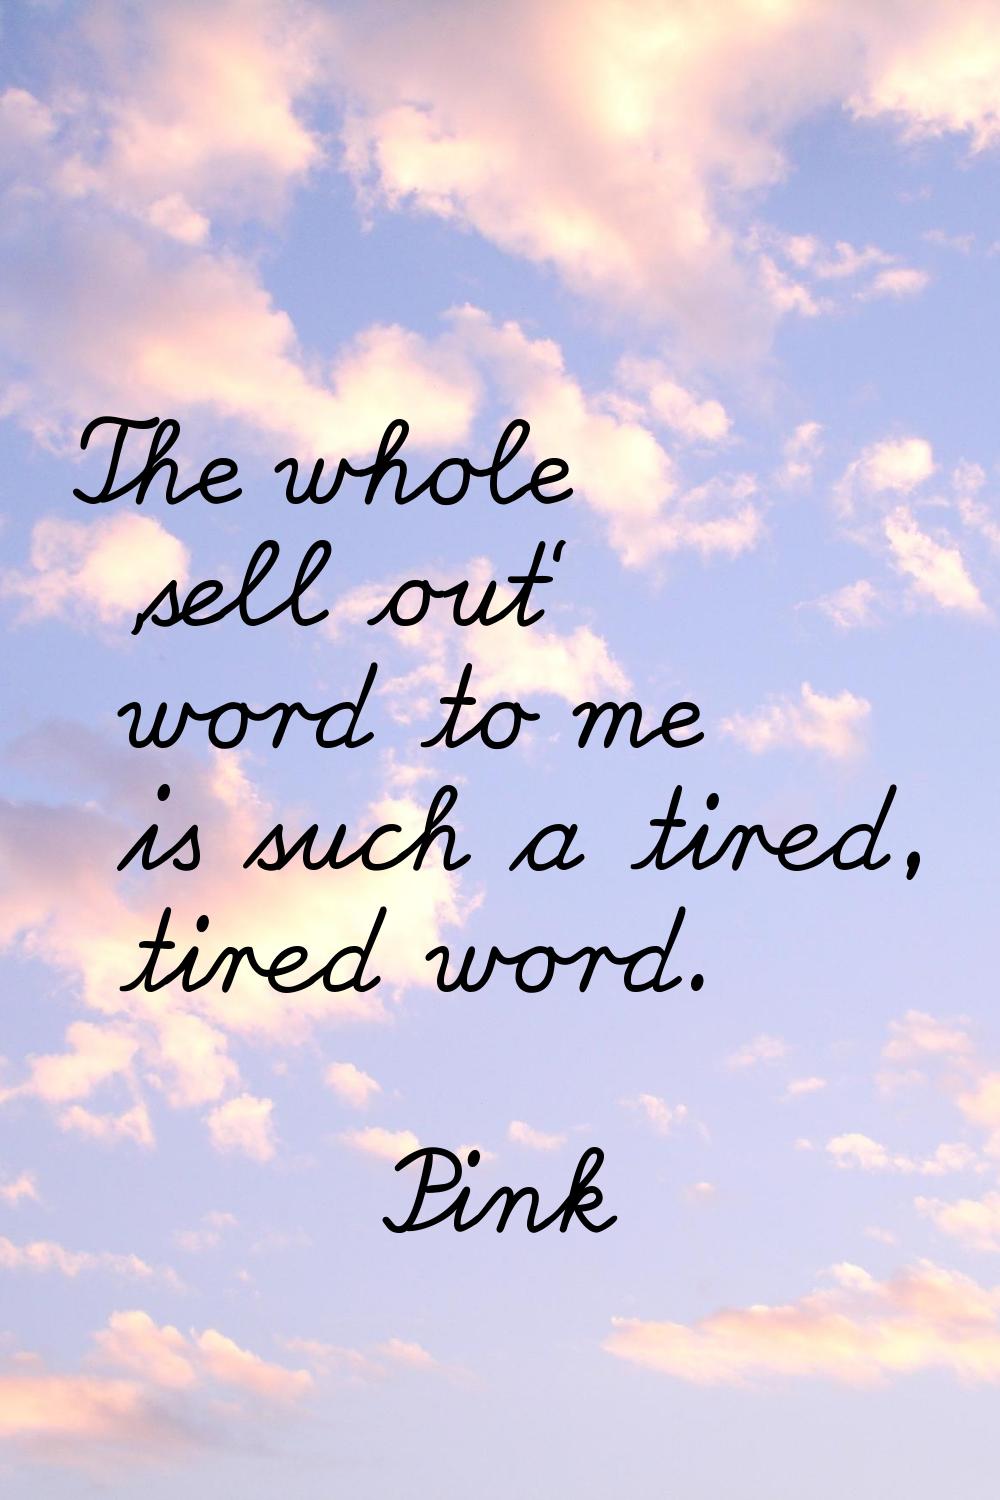 The whole 'sell out' word to me is such a tired, tired word.